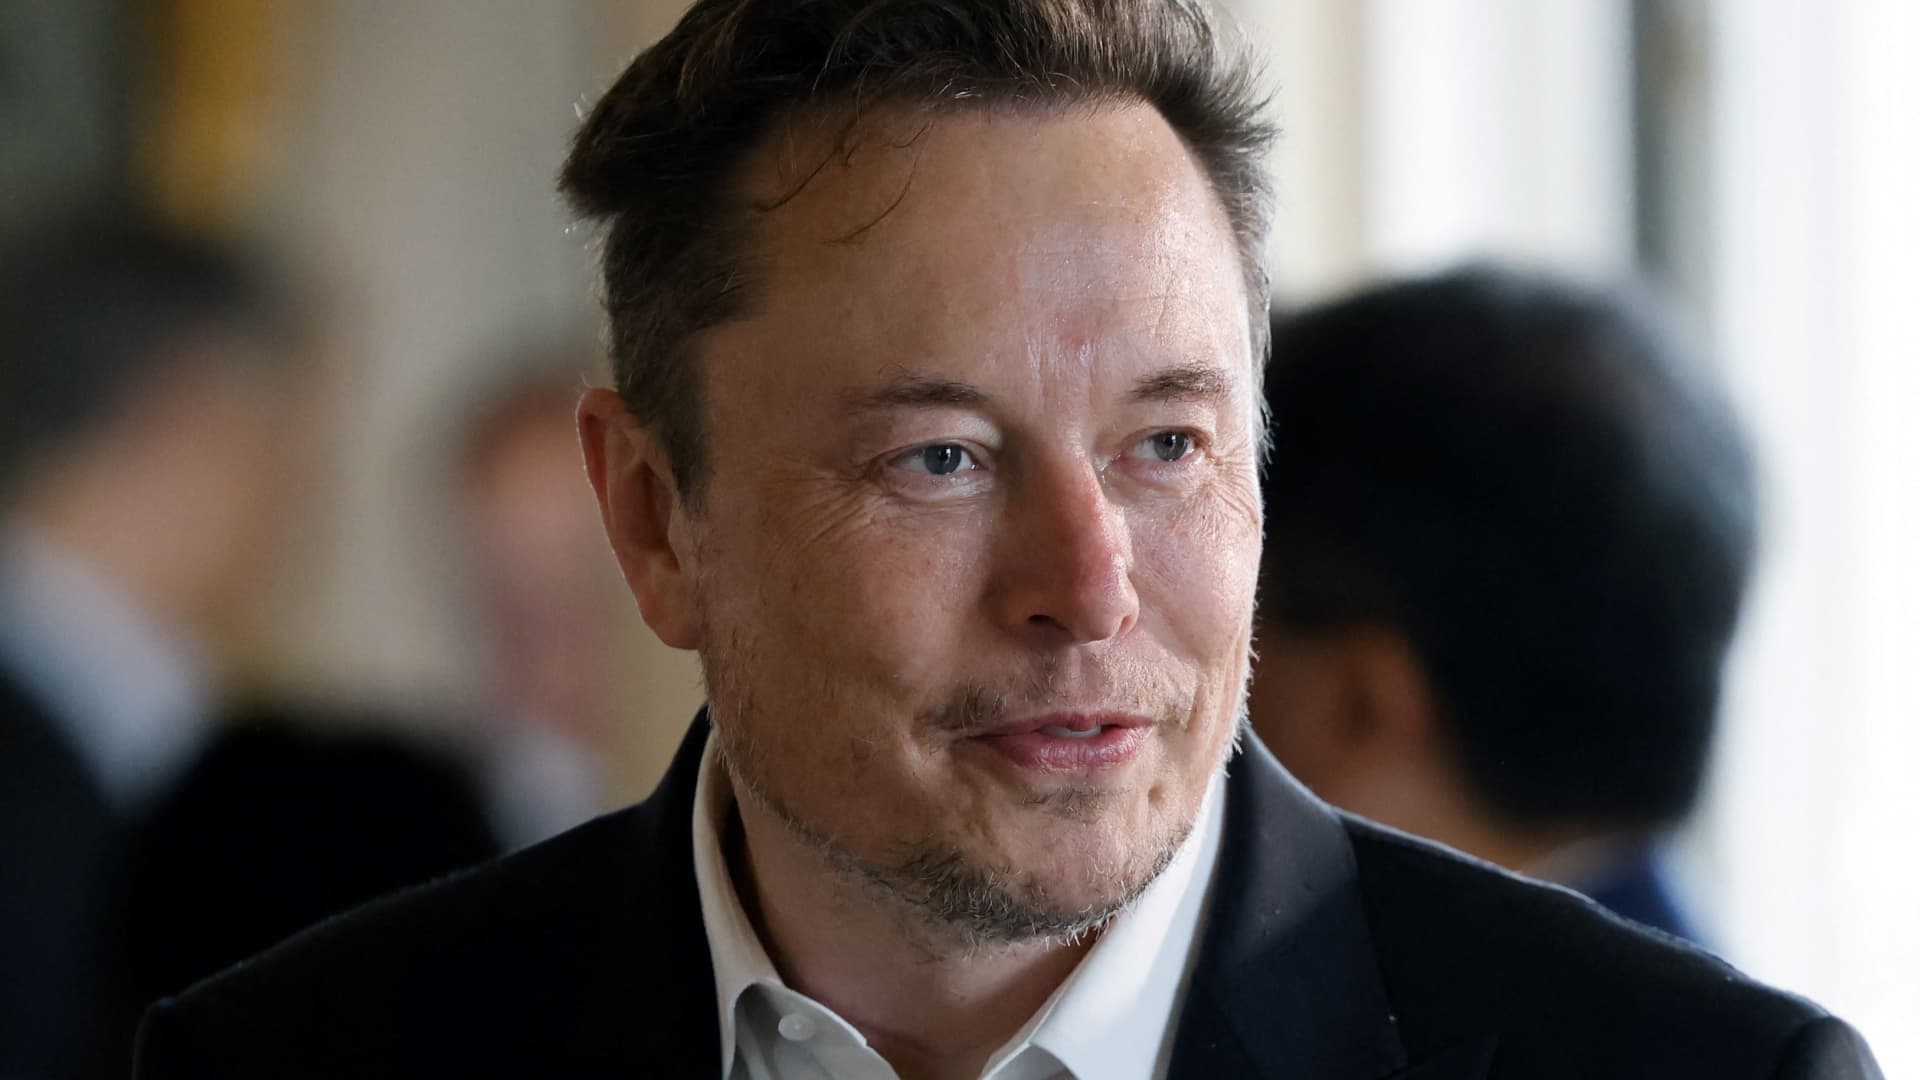 Elon Musk discussed with Mongolia's prime minister possible expansion